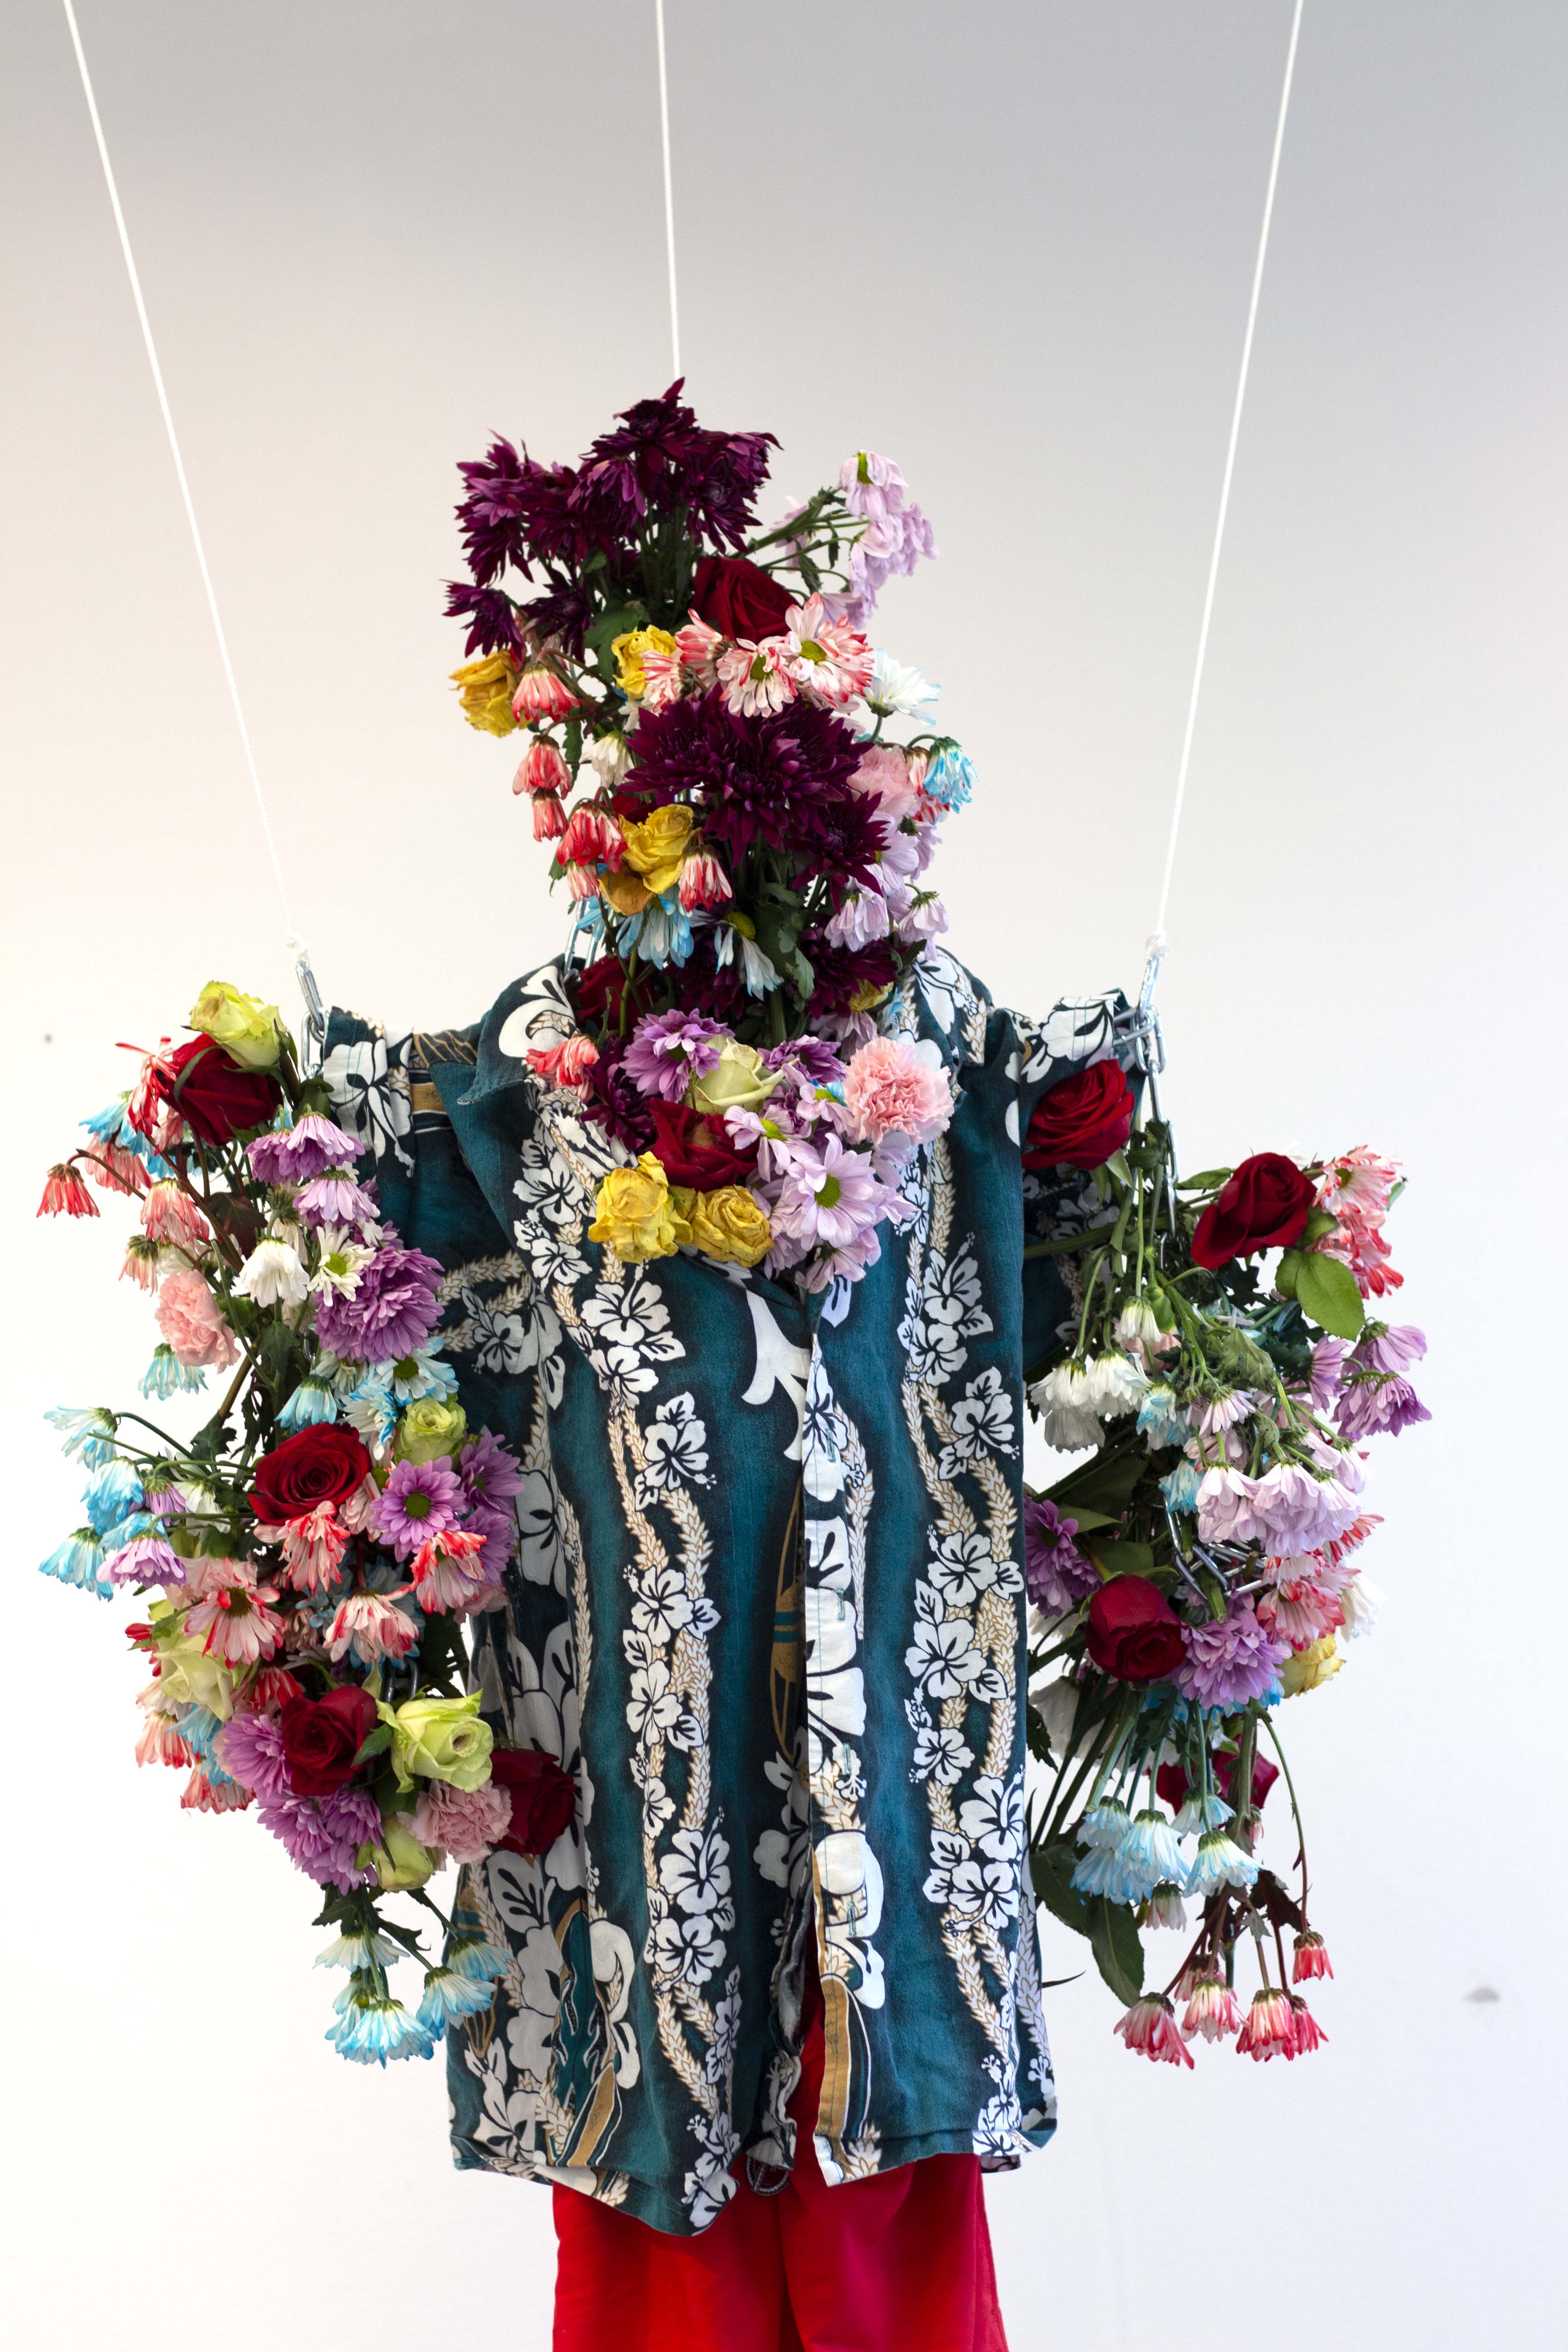 A sculpture made of flowers and clothing.